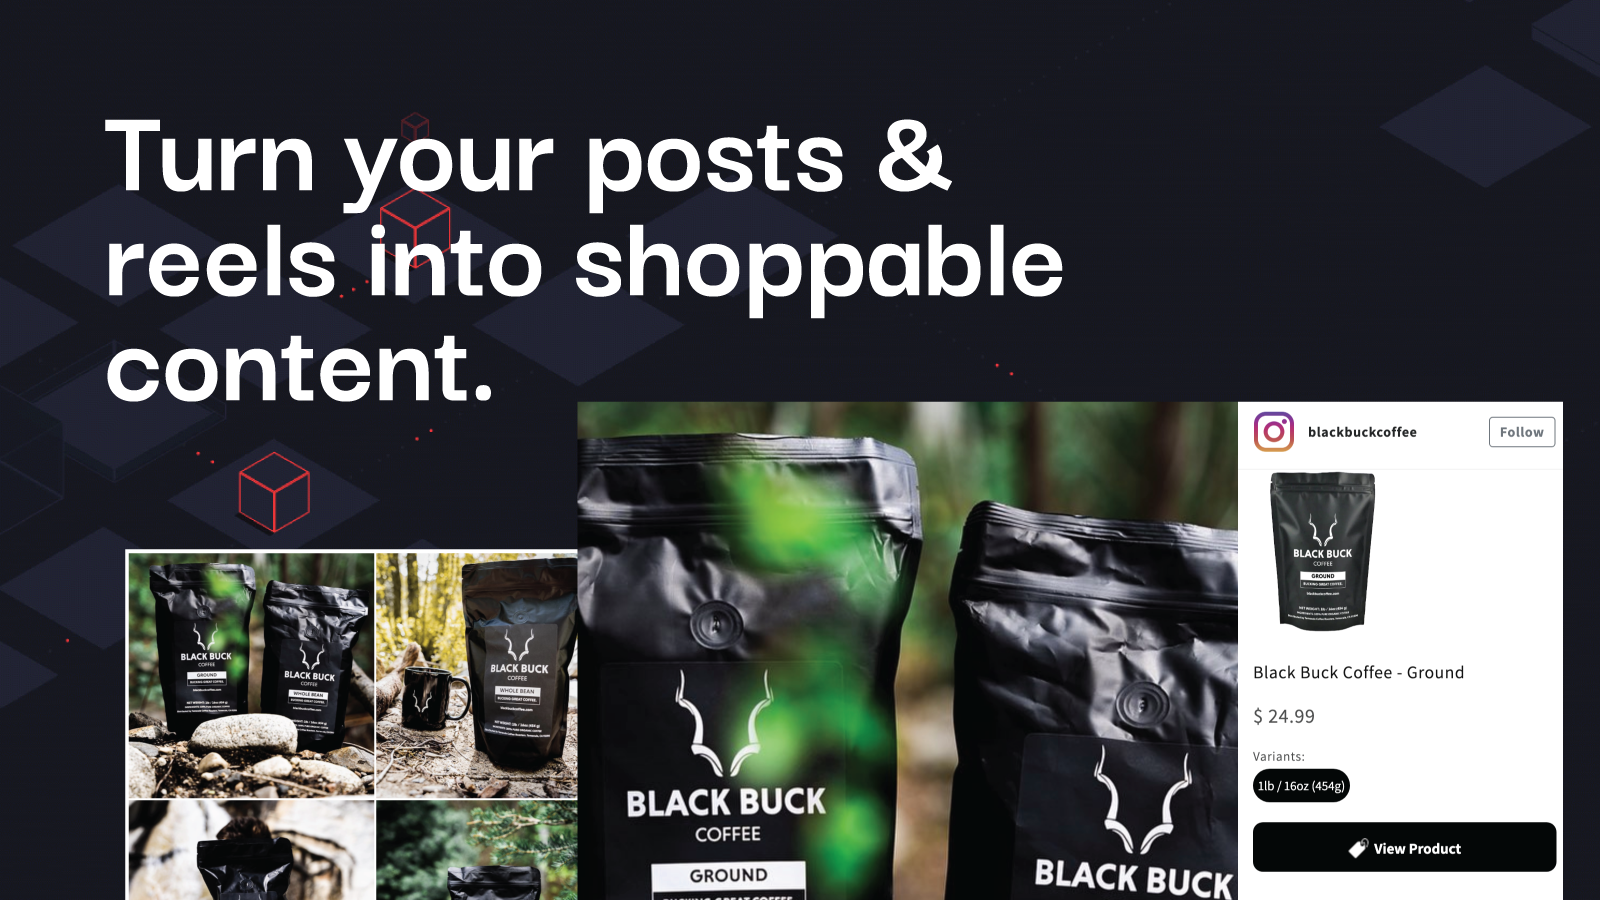 Turn your posts & reels into Shoppable content with Shopagram